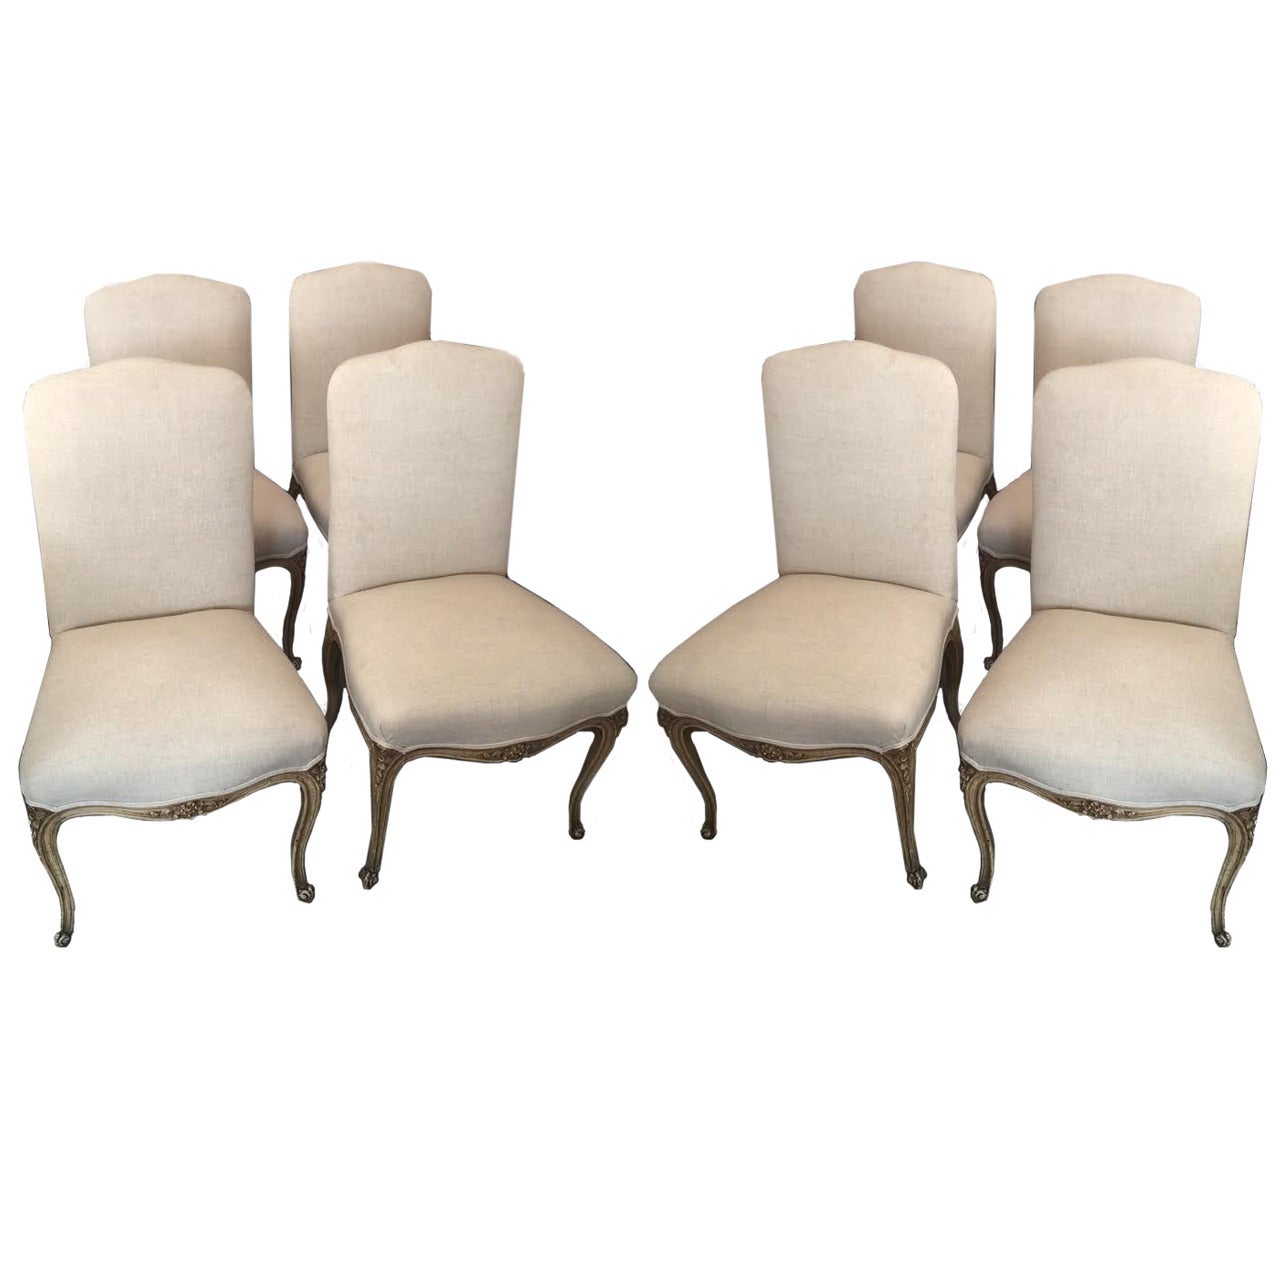 Set of Eight 20th Century Louis XV Style Carved Wood & Upholstered Dining Chairs For Sale